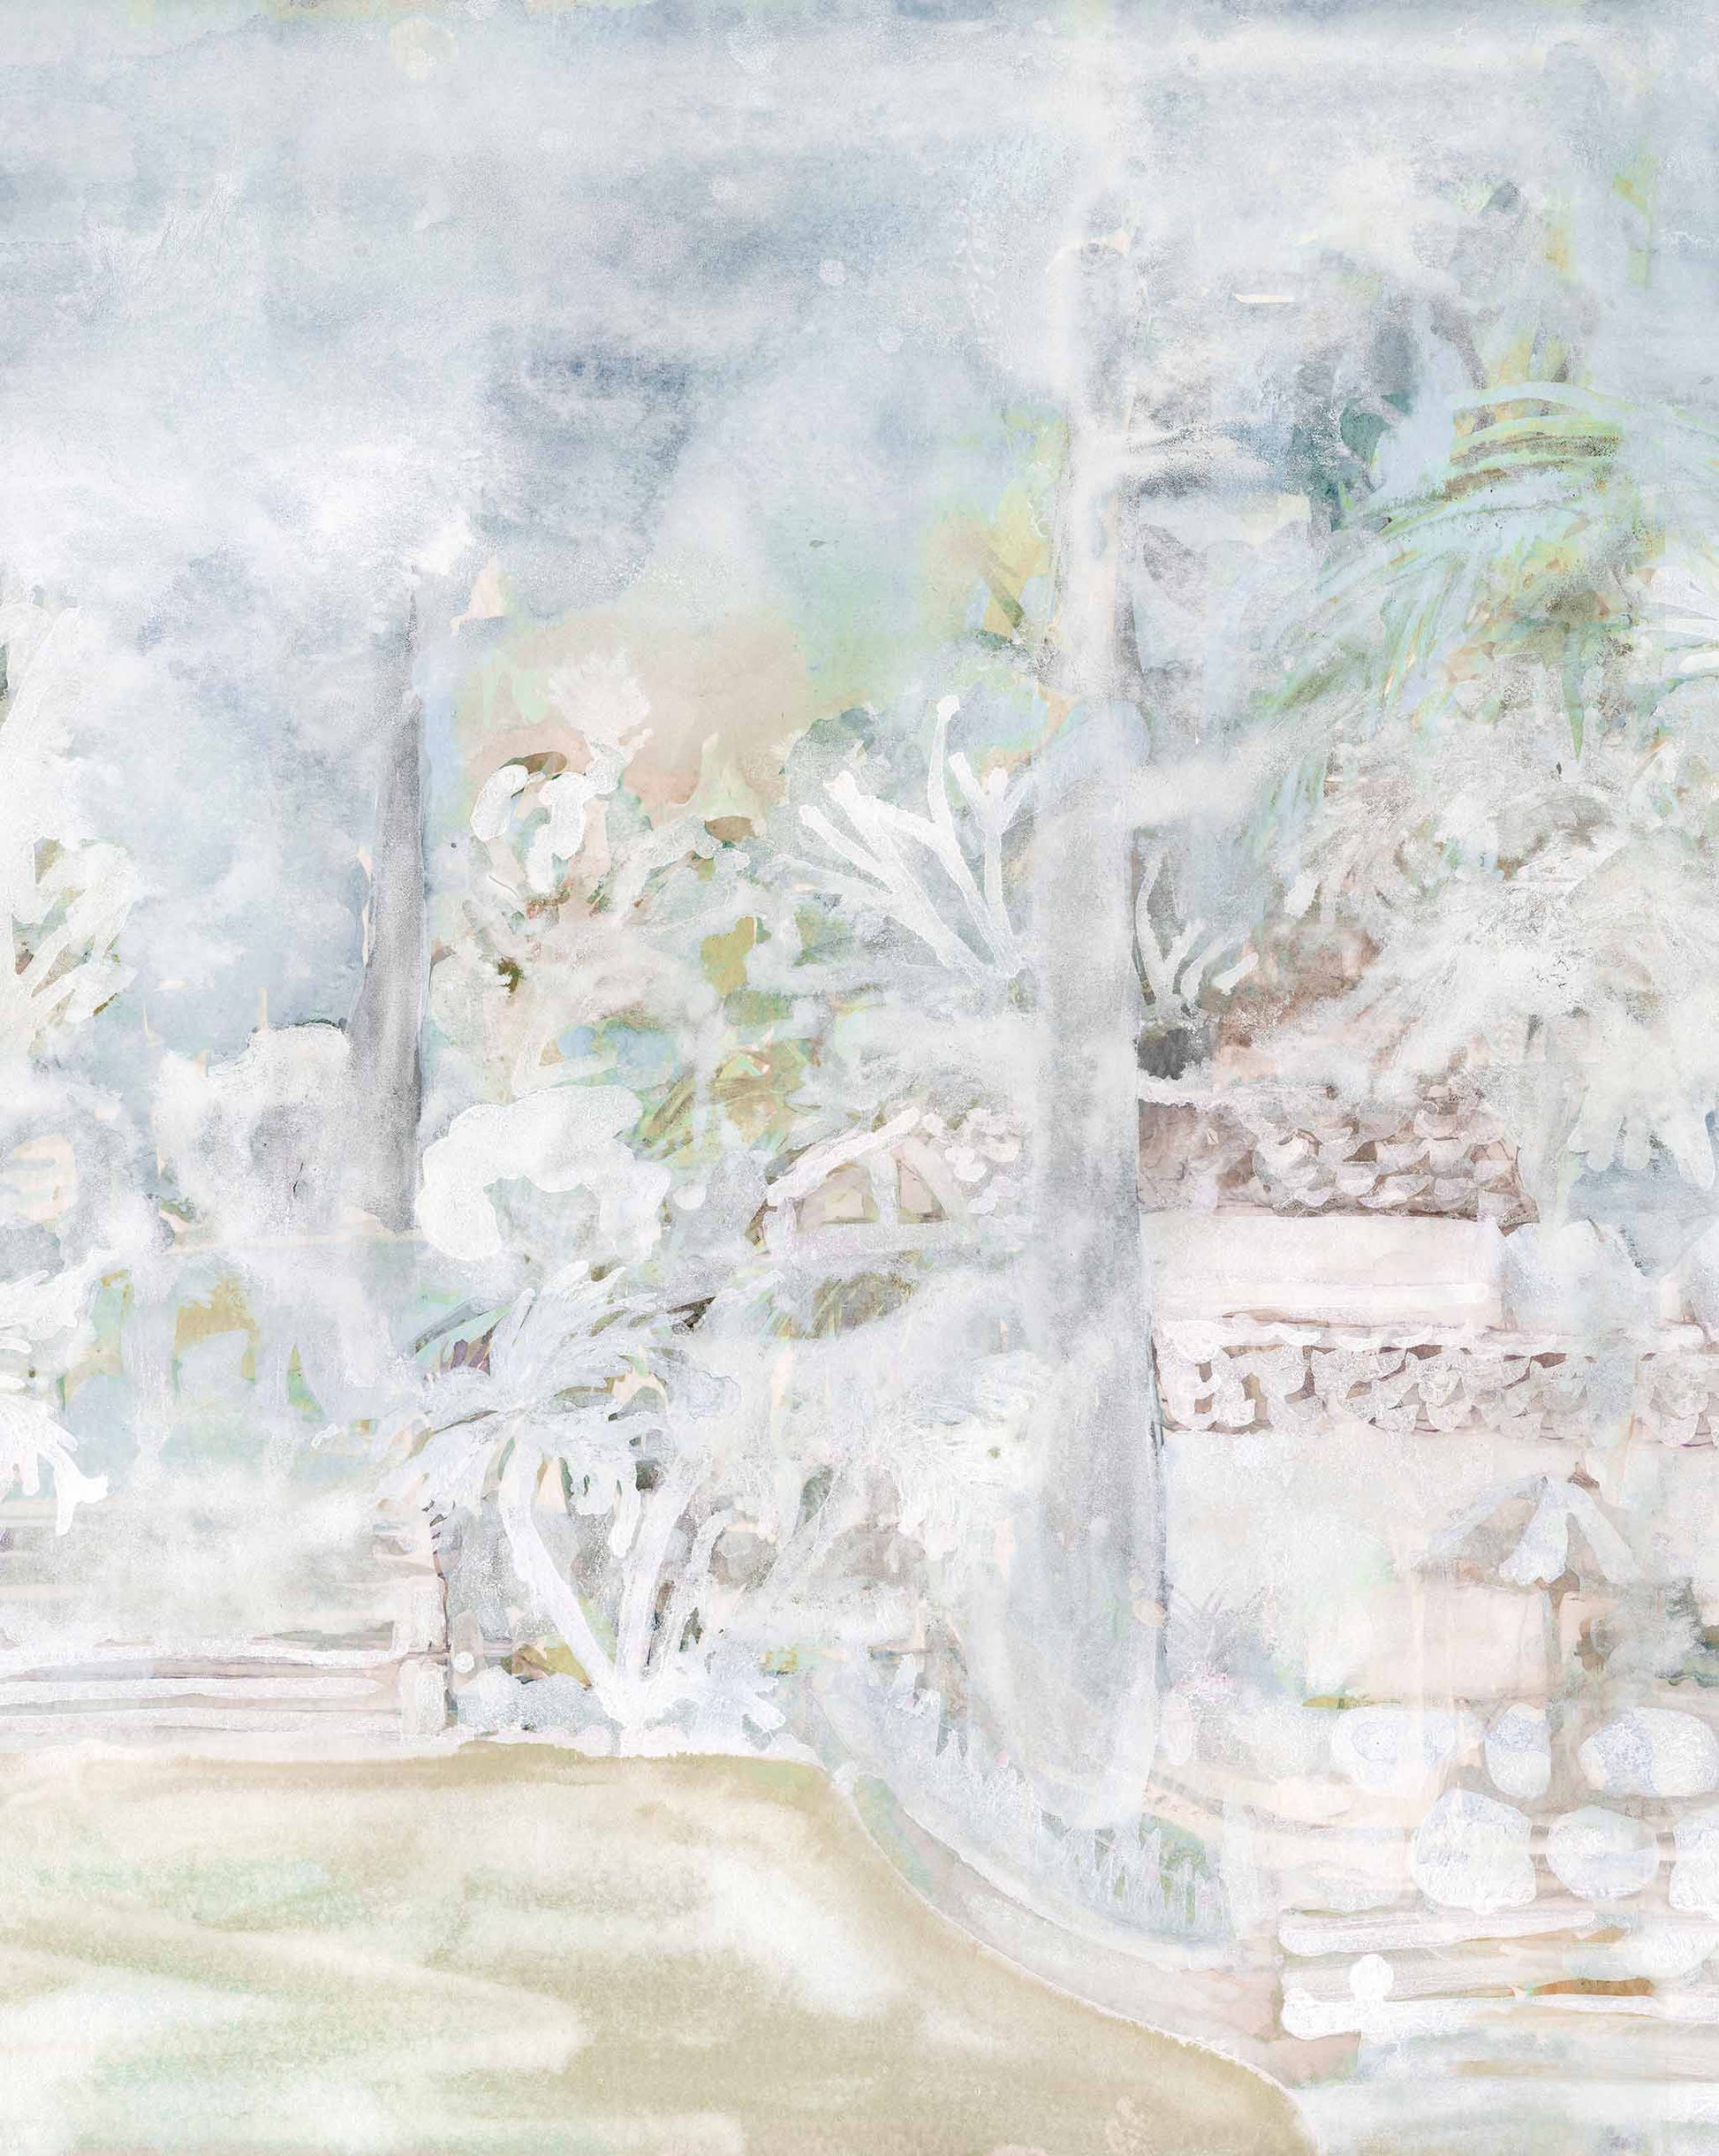 Watercolor painting of a serene, snow-covered landscape with muted colors, depicting an Italian villa and trees barely visible through a foggy, wintry haze using the Regalo di Dio Wallpaper Mural||Aqua.